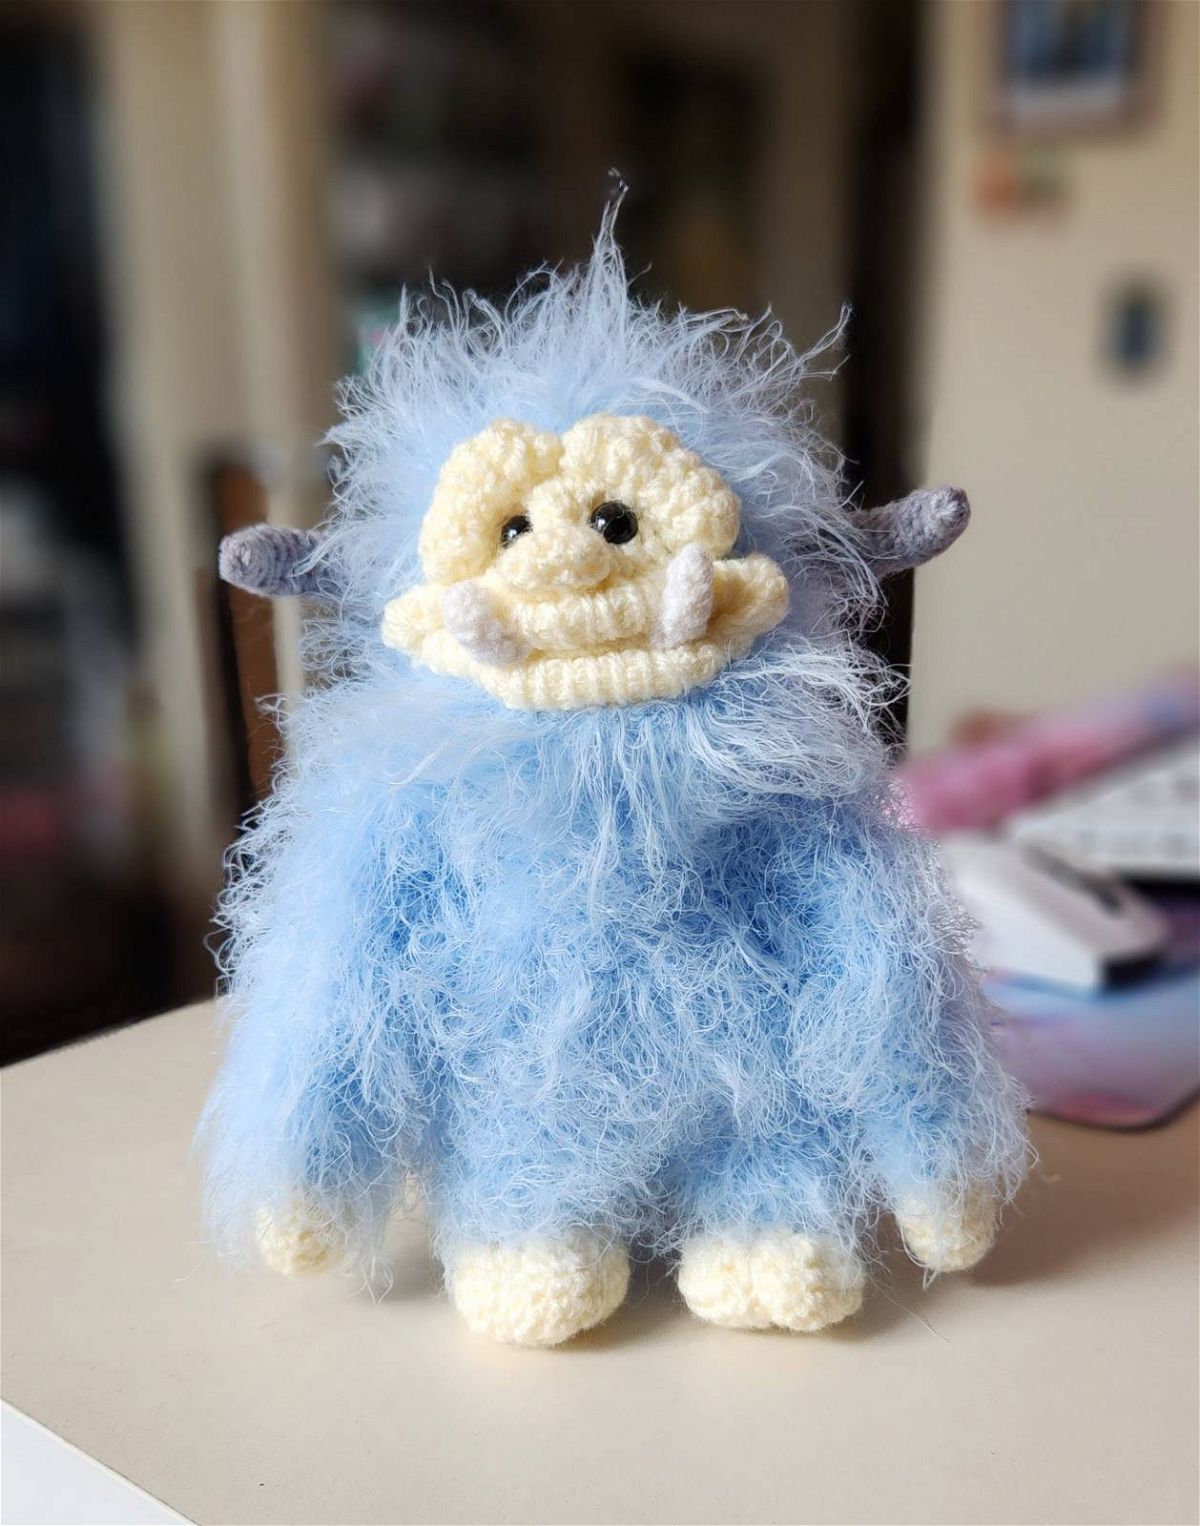 Crochet Amigurumi Fluffy Monster Pattern Review by Weezietoo for Cottontail Whiskers